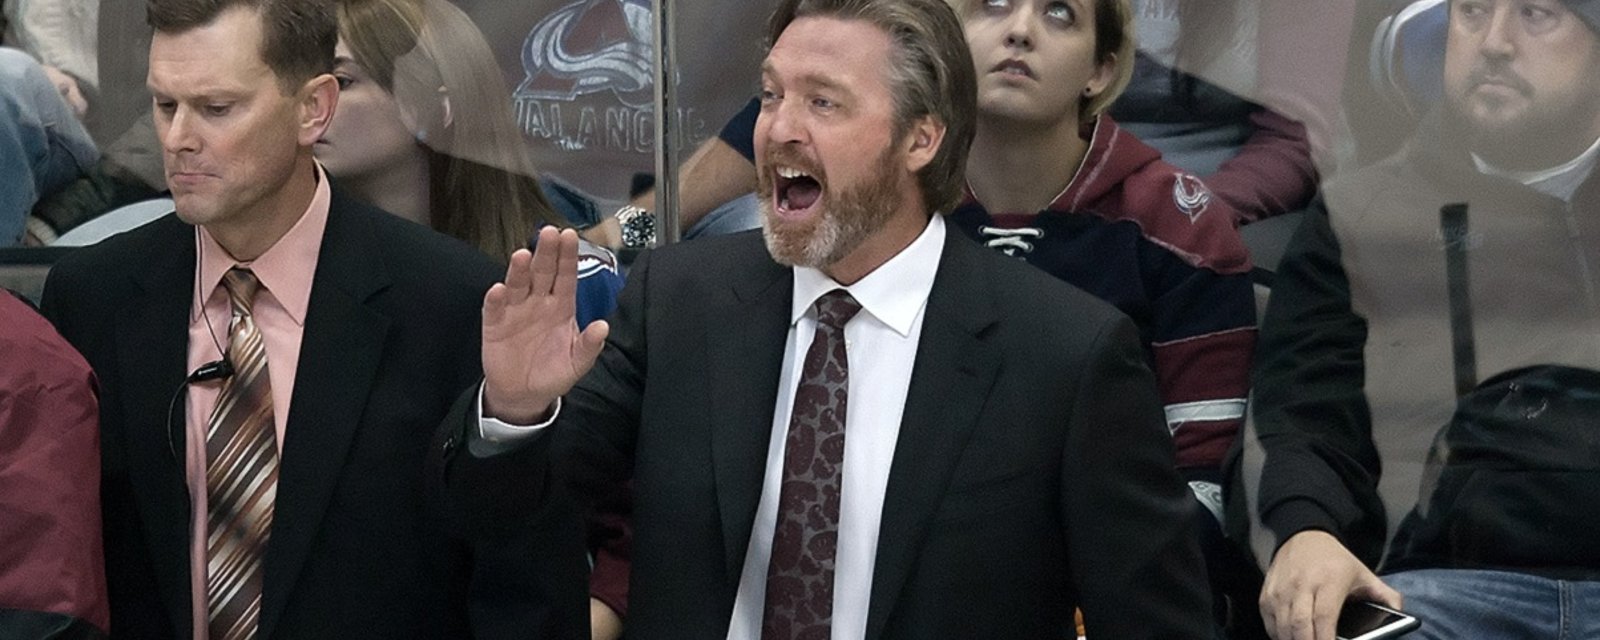 Patrick Roy ejected after heated argument with referee.